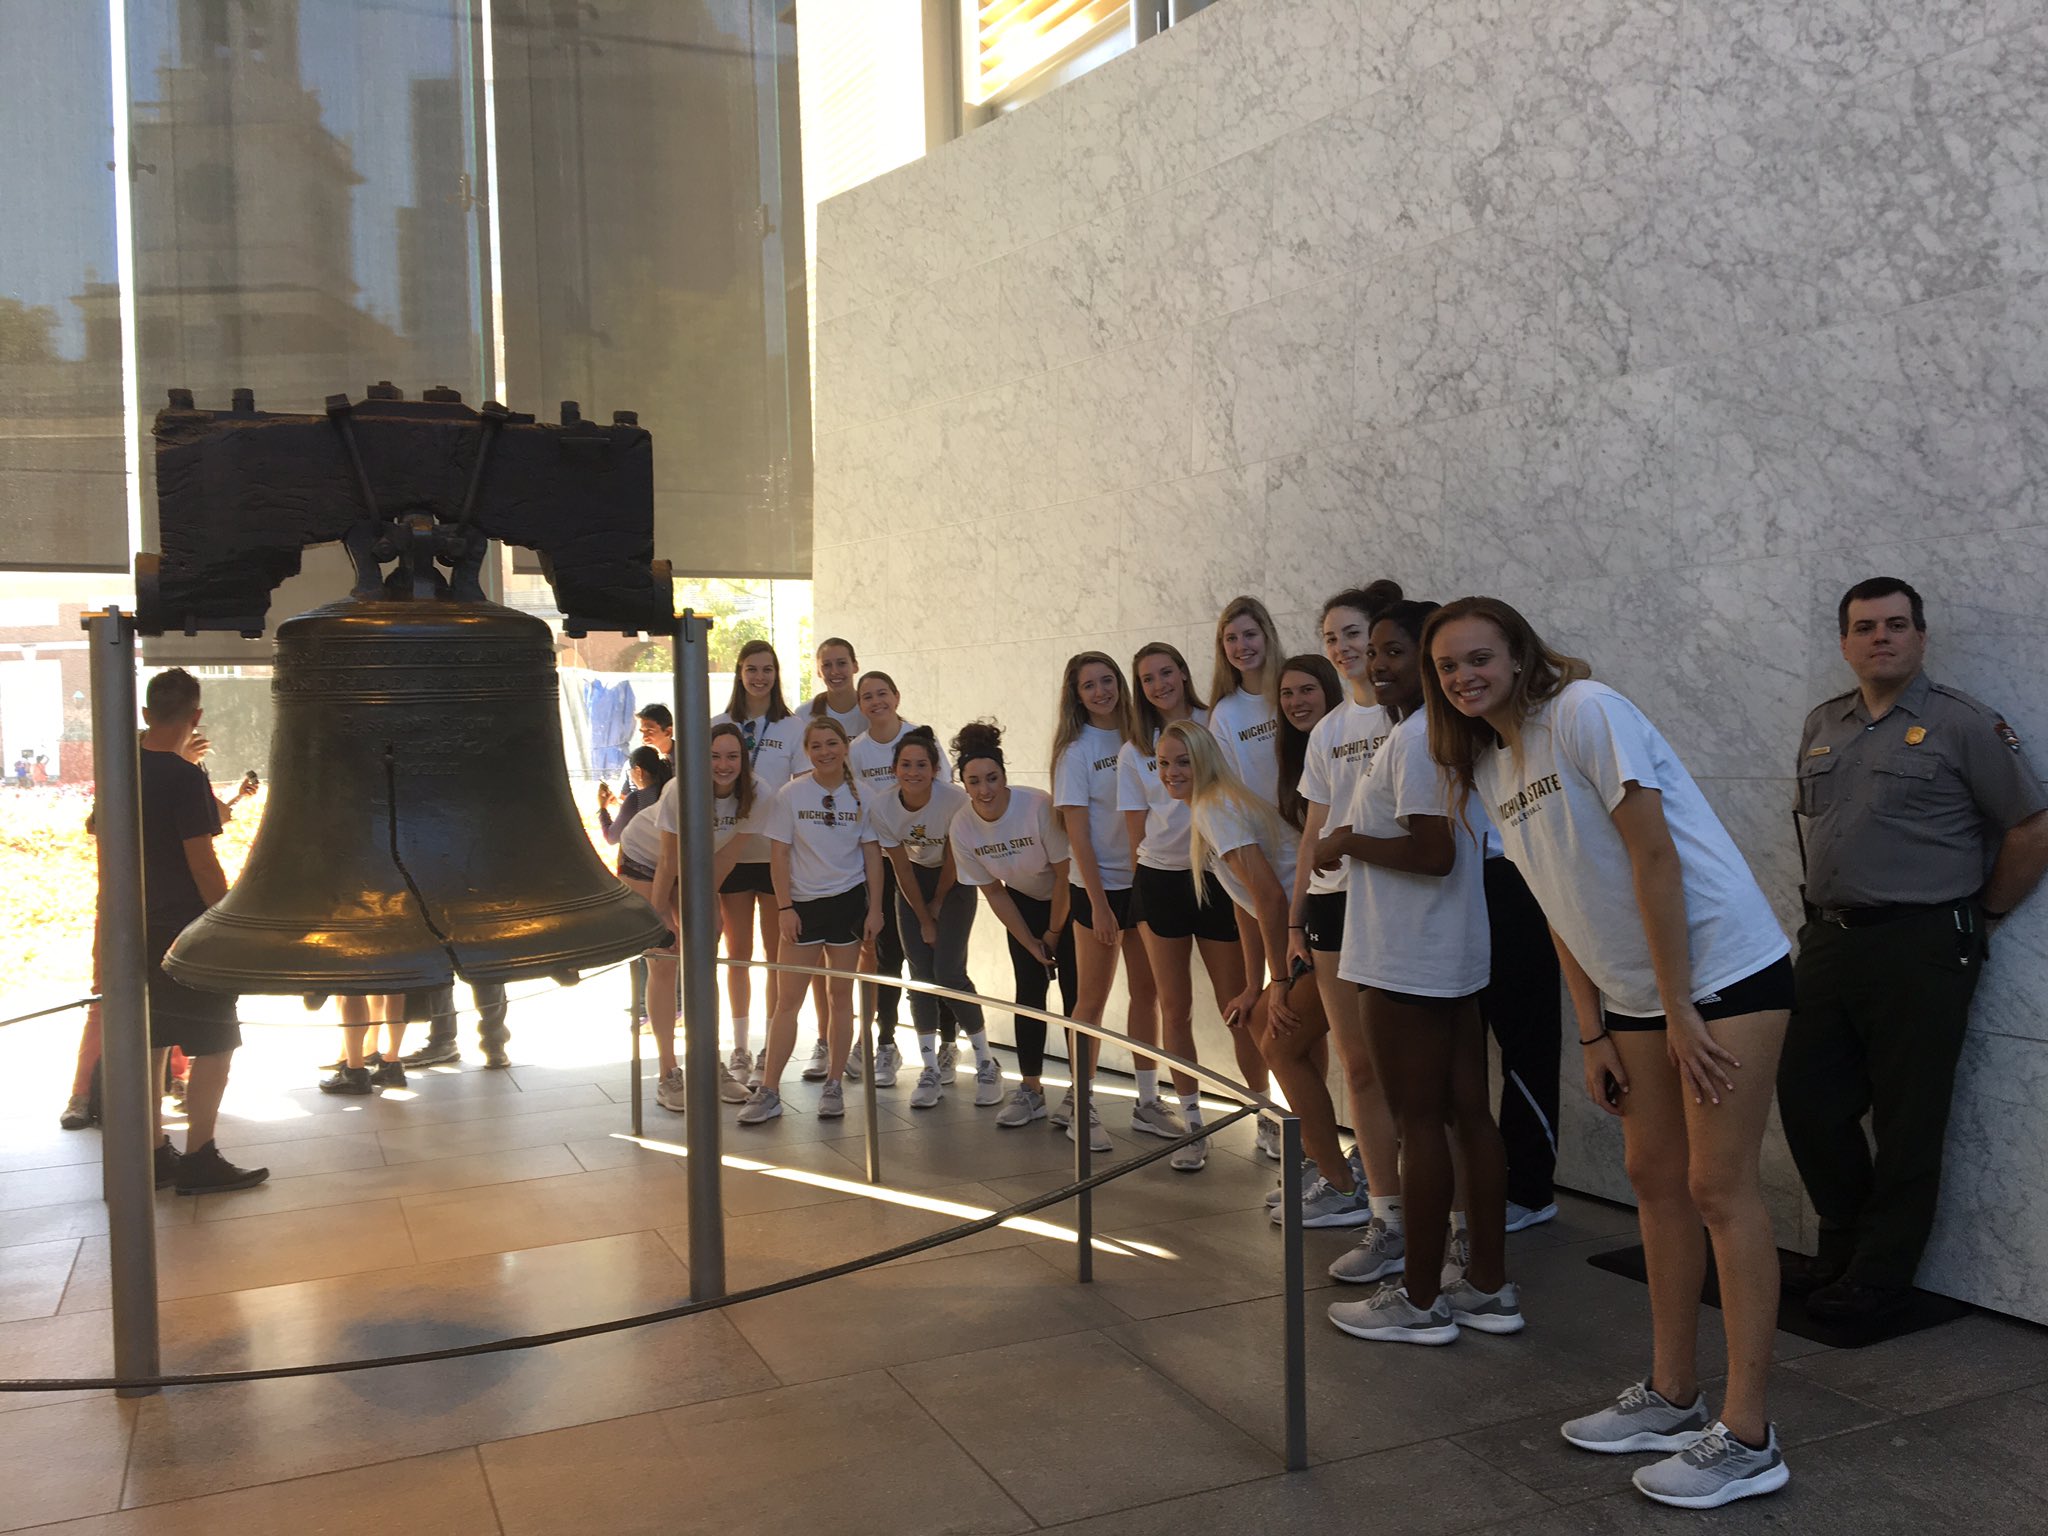 Wichita State Volleyball On Twitter Independence Hall And The